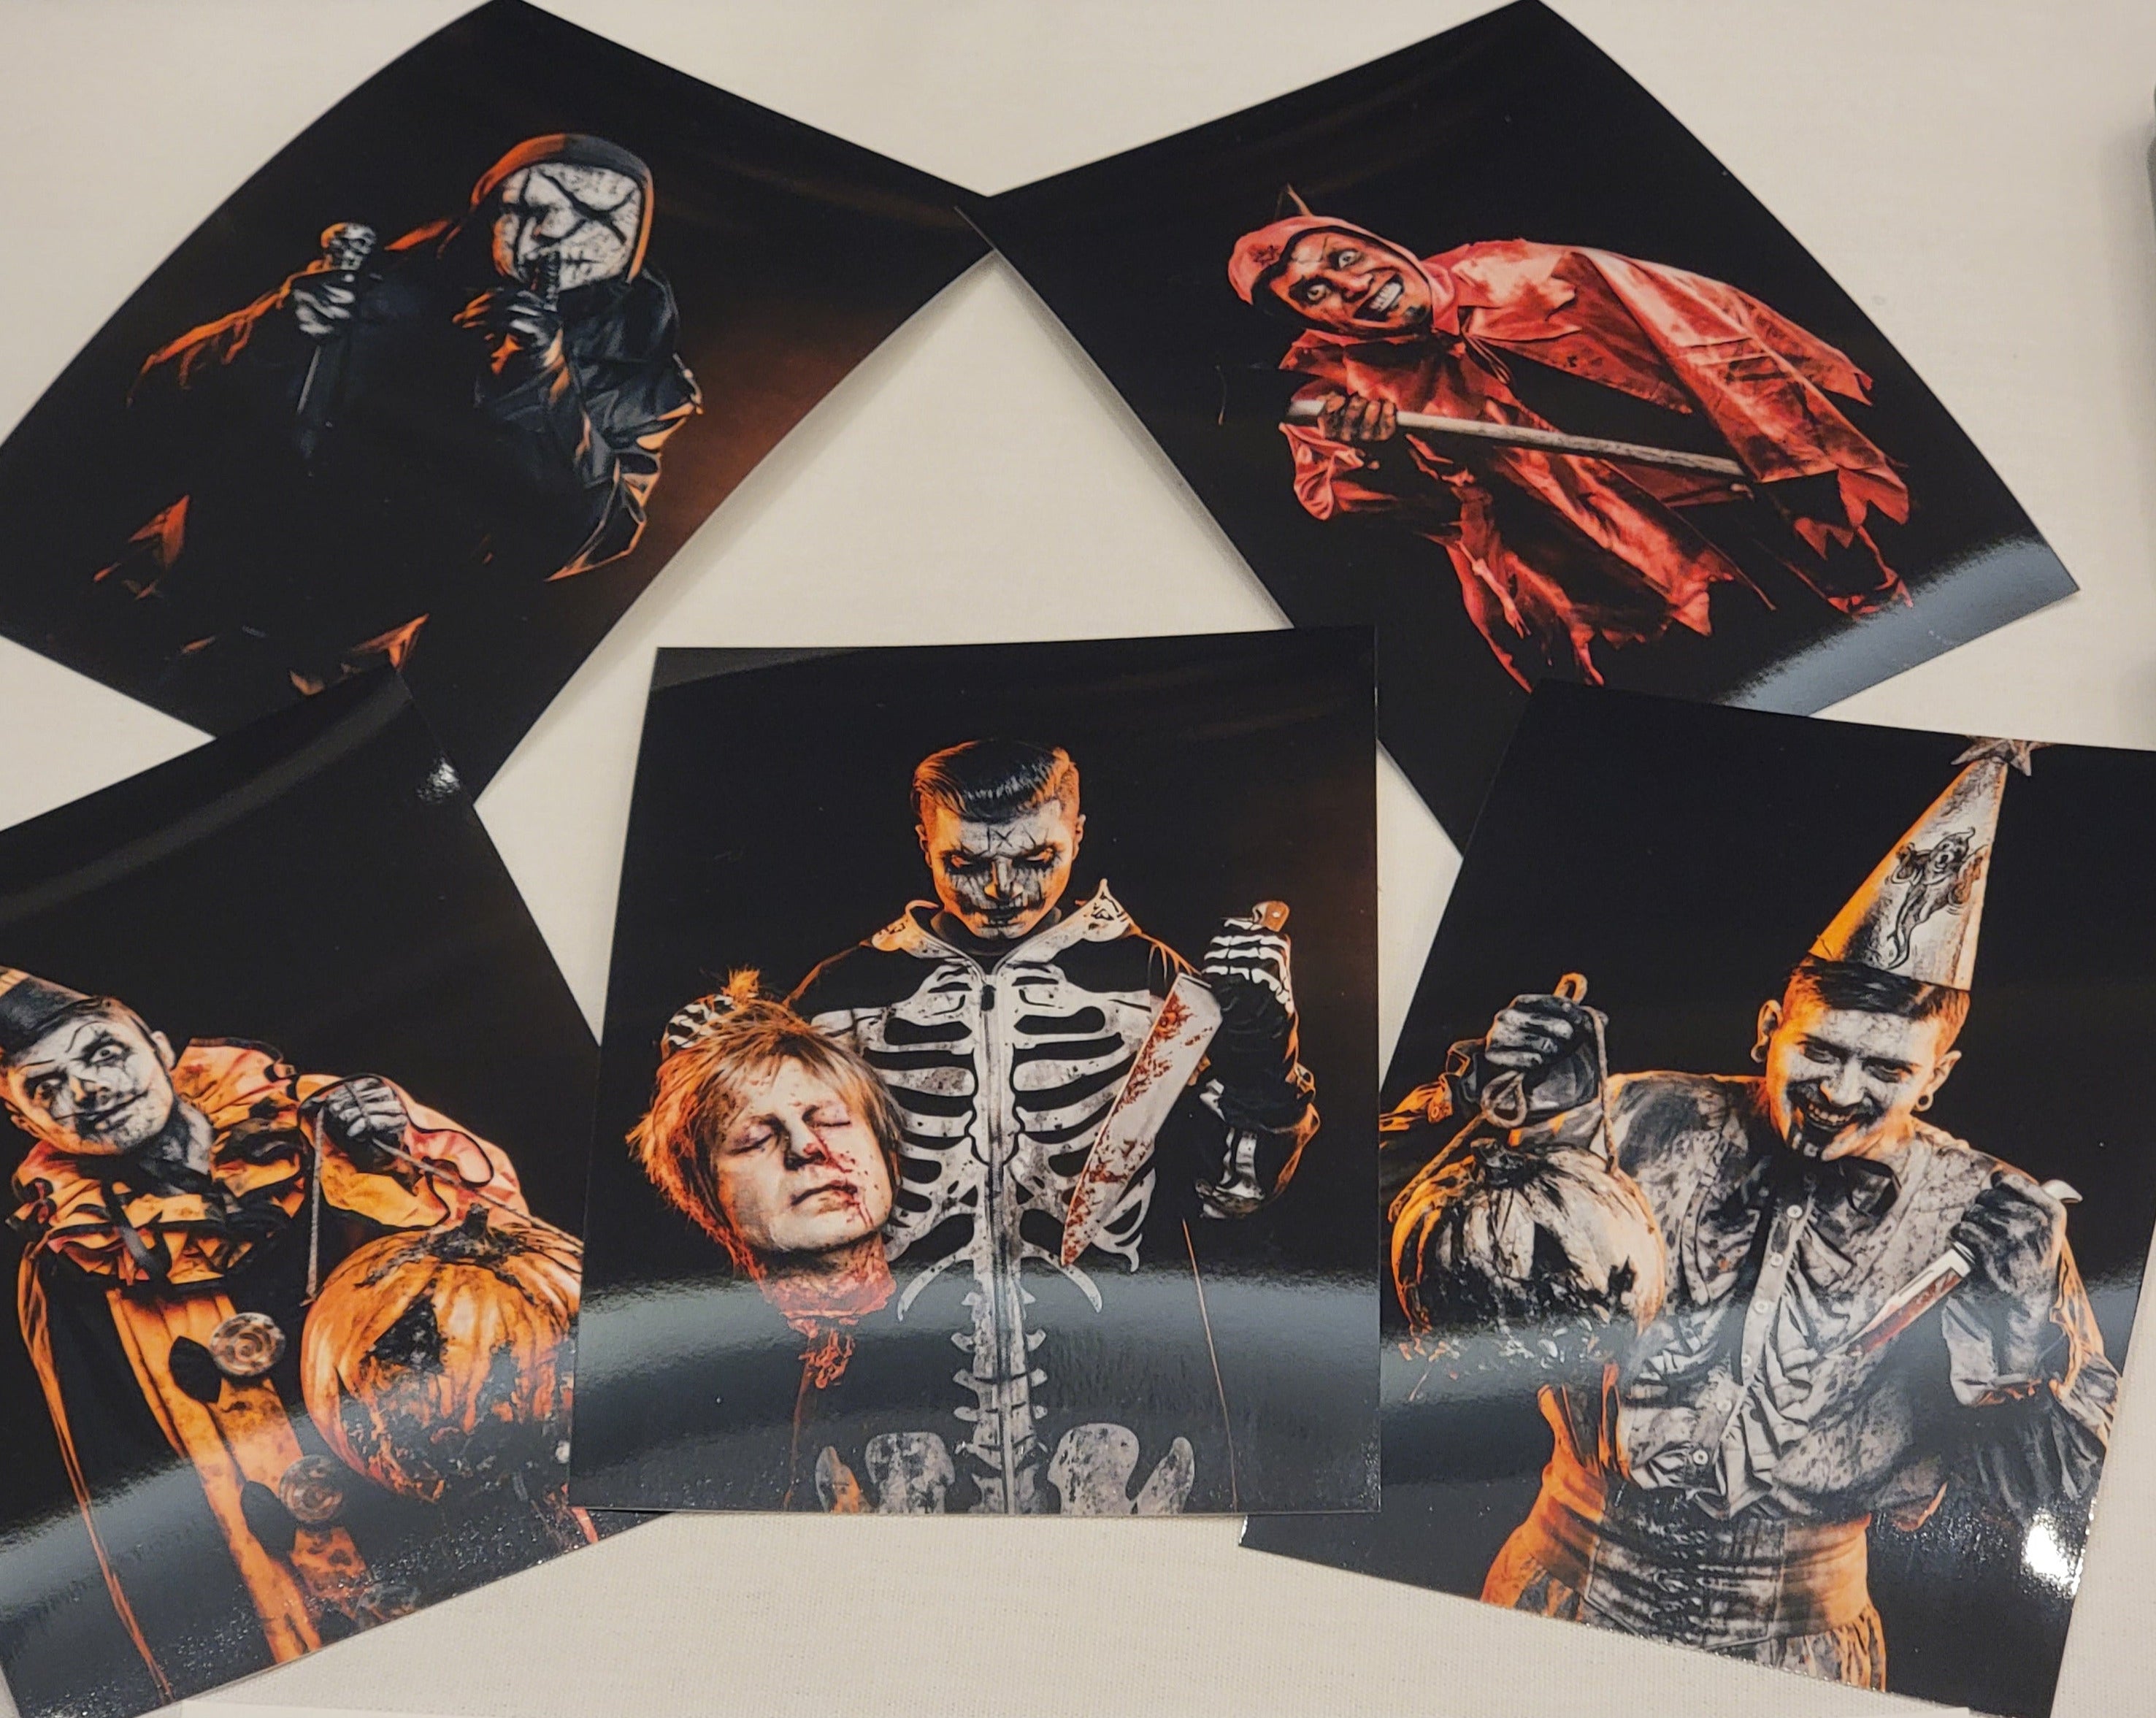 INK Silver Scream exclusive 4x6 5 pack